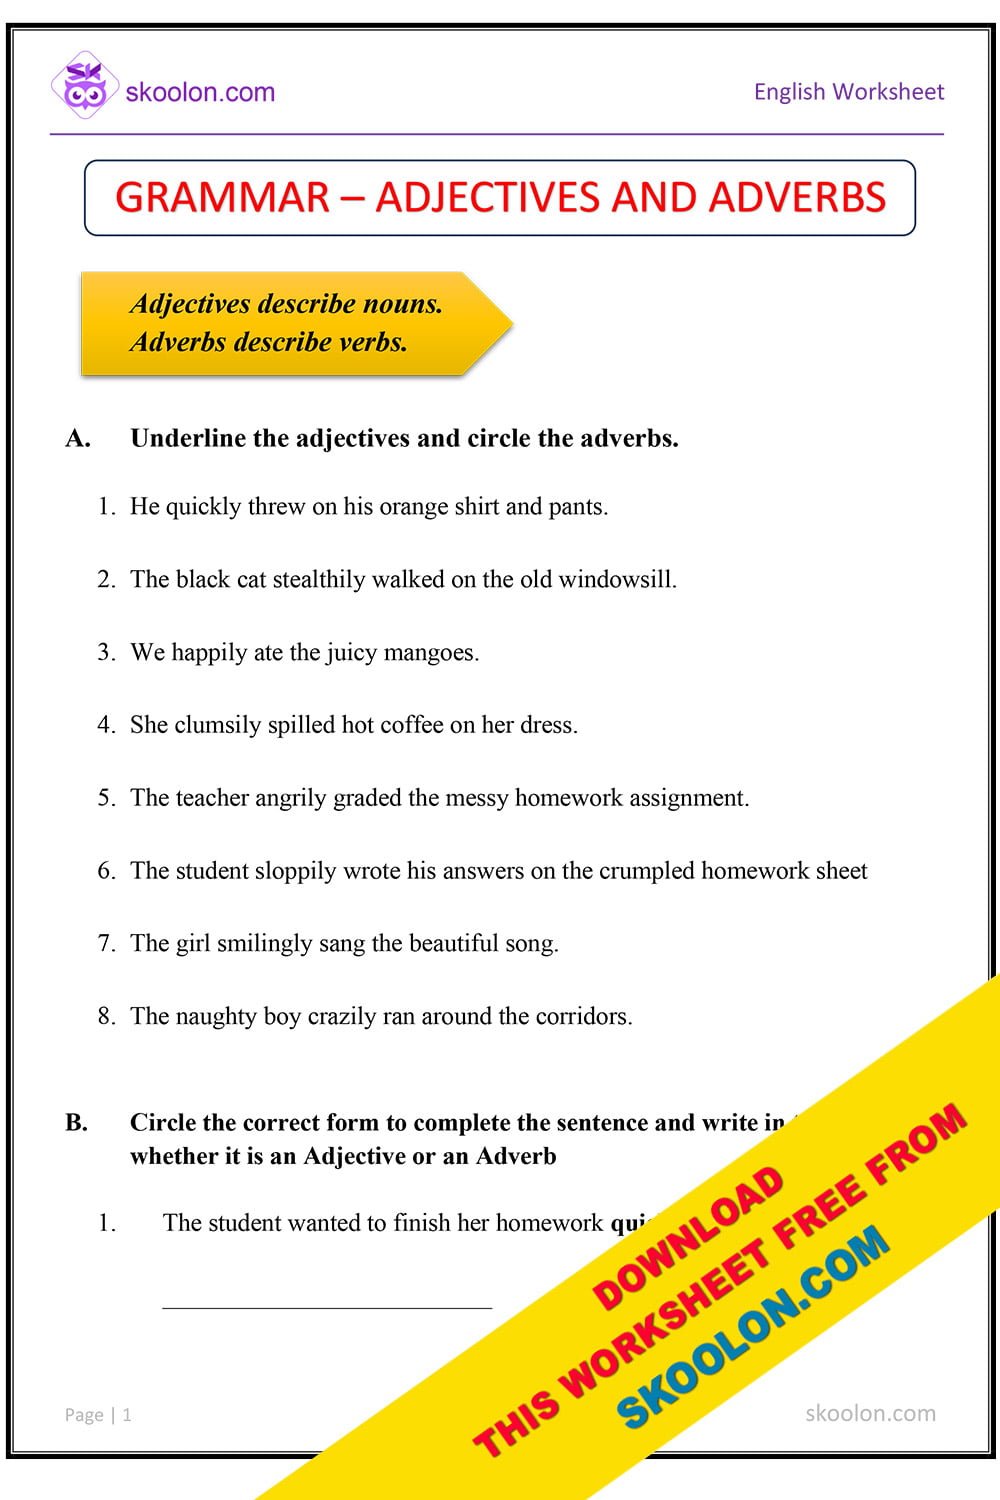 Find The Adjectives And Adverbs Worksheet